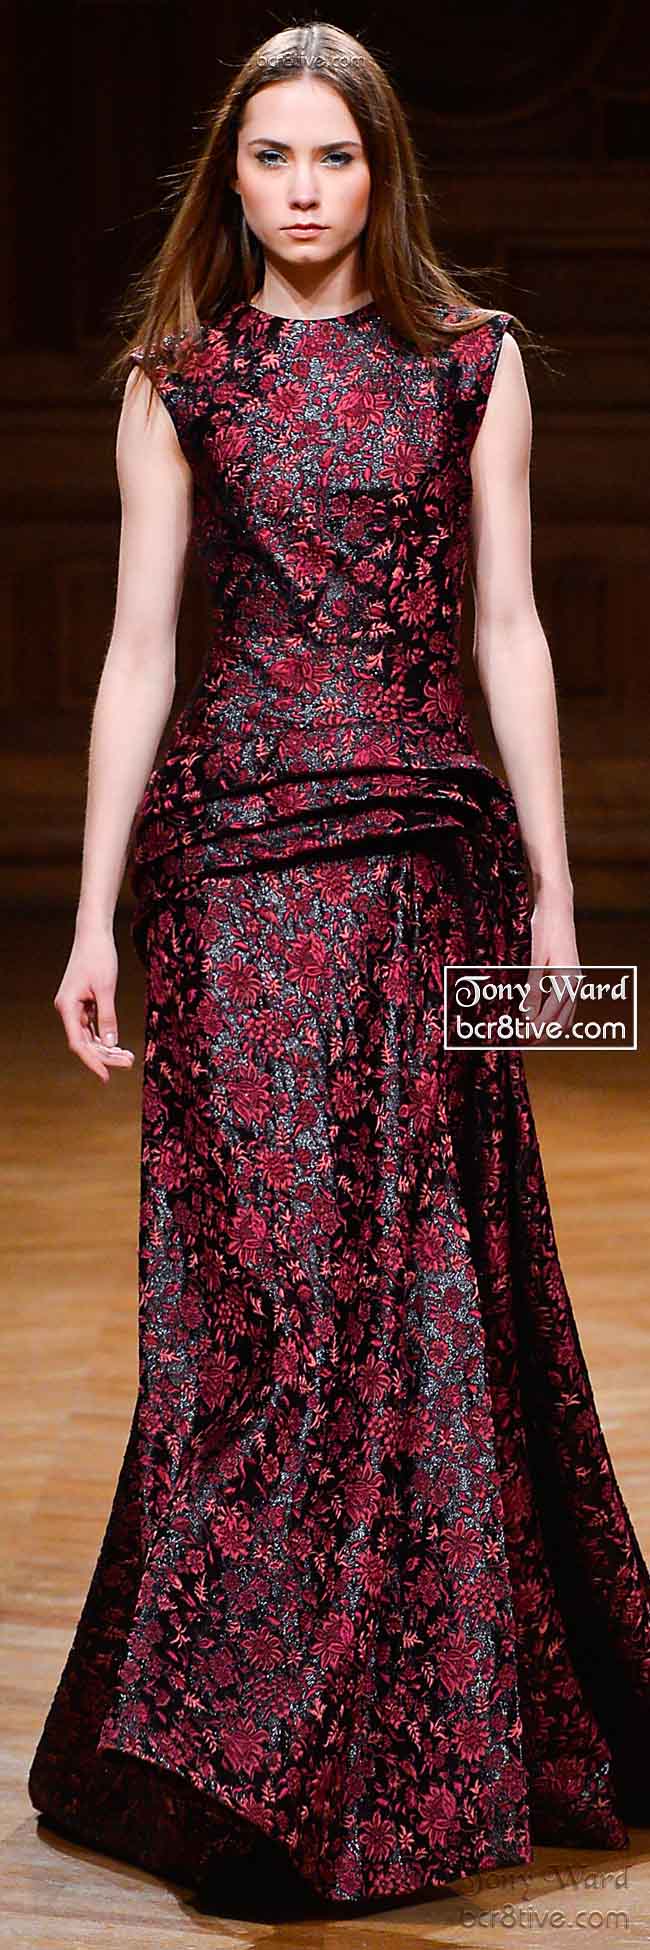 Ruby Red Floral Sculpted Gown